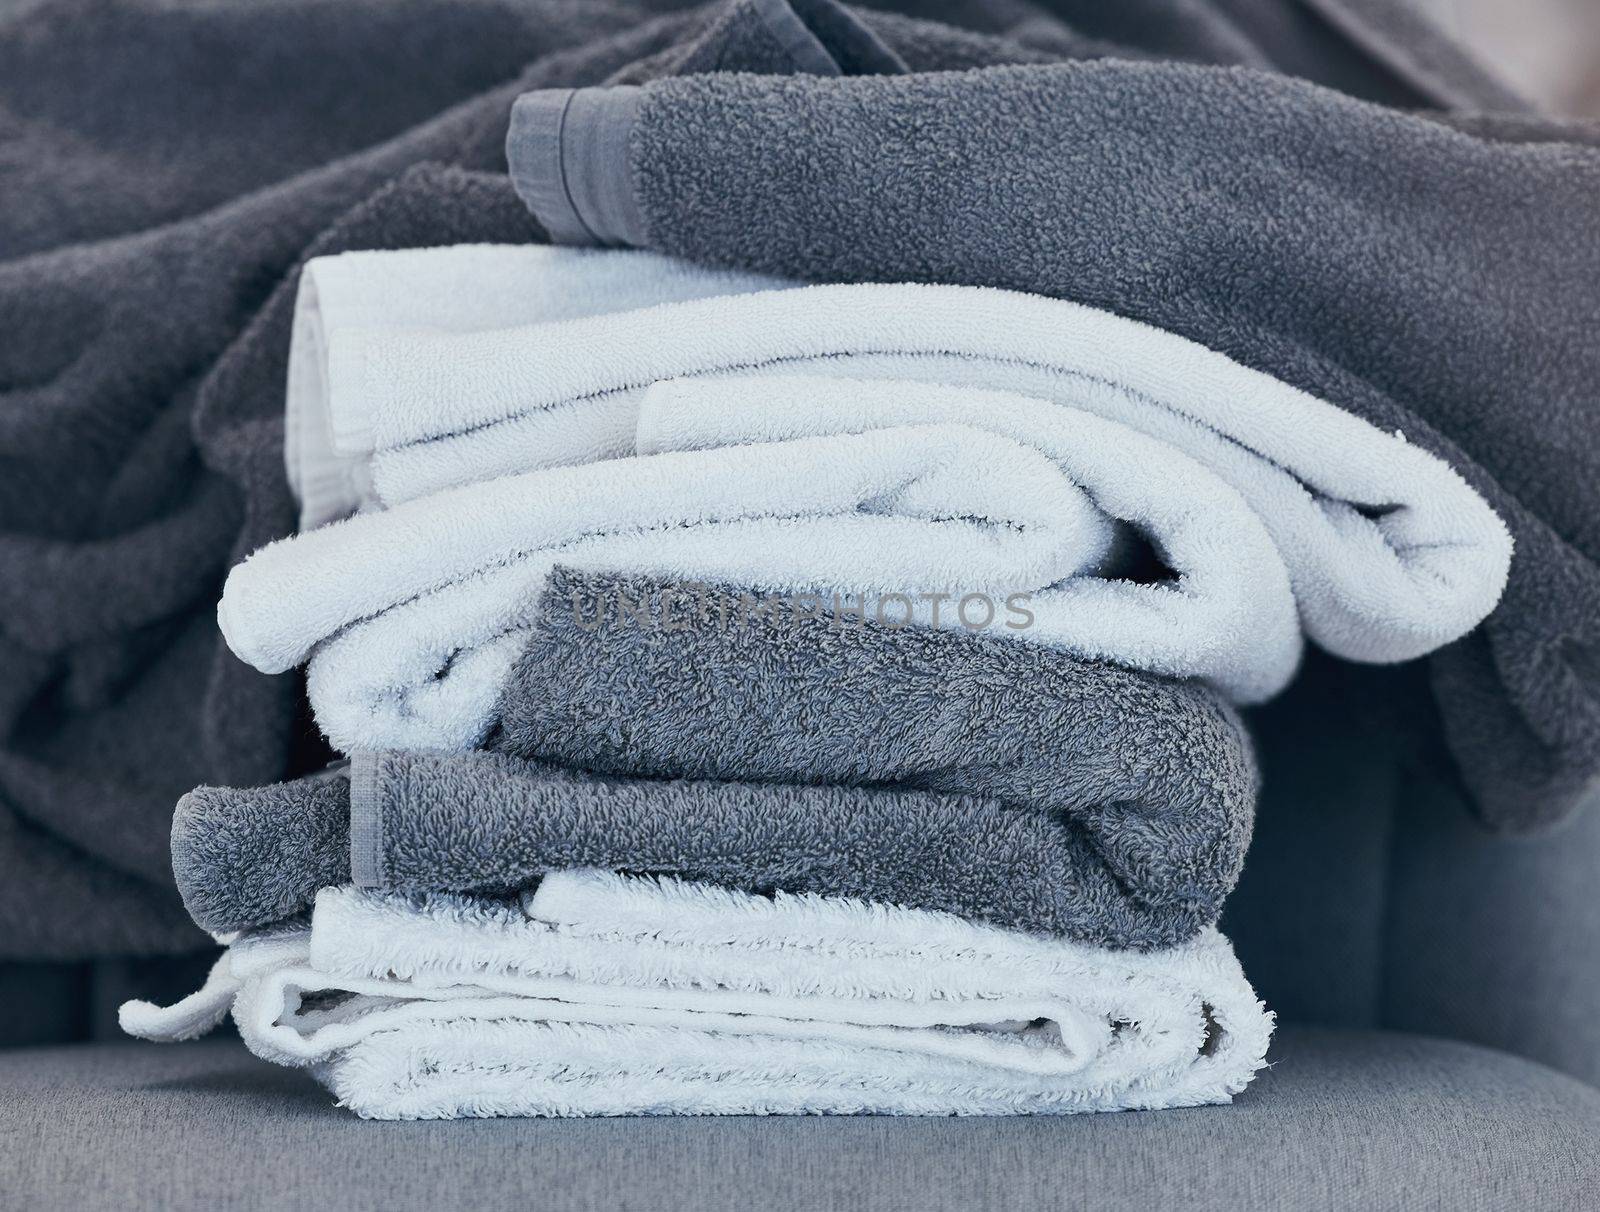 Towels, clean and laundry with texture and fabric for cleaning and hygiene in hospitality or home. Fresh washing, cleaning service or household maintenance closeup with cotton towel and textures. by YuriArcurs